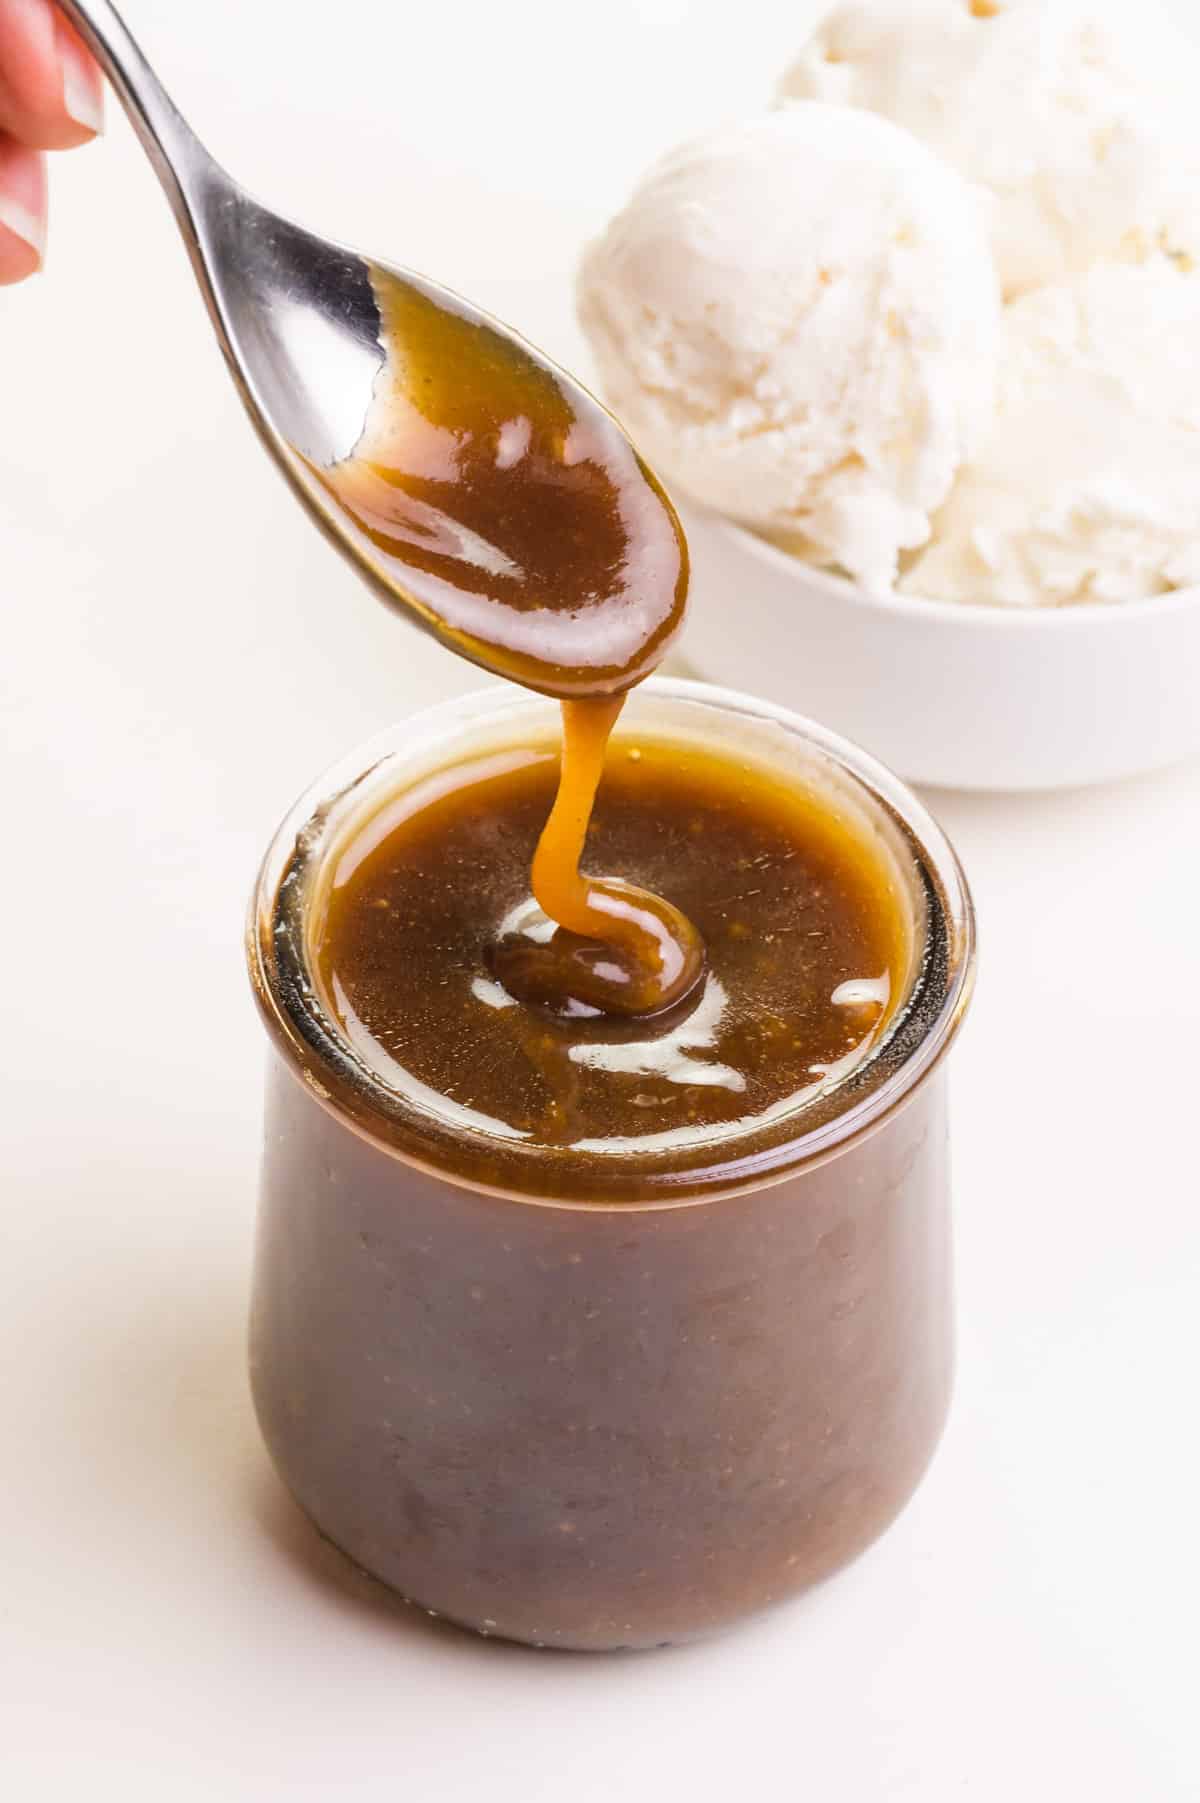 A hand holding a spoon with vegan butterscotch sauce on top of a glass jar full of sauce.  There is a bowl of ice cream in the background.